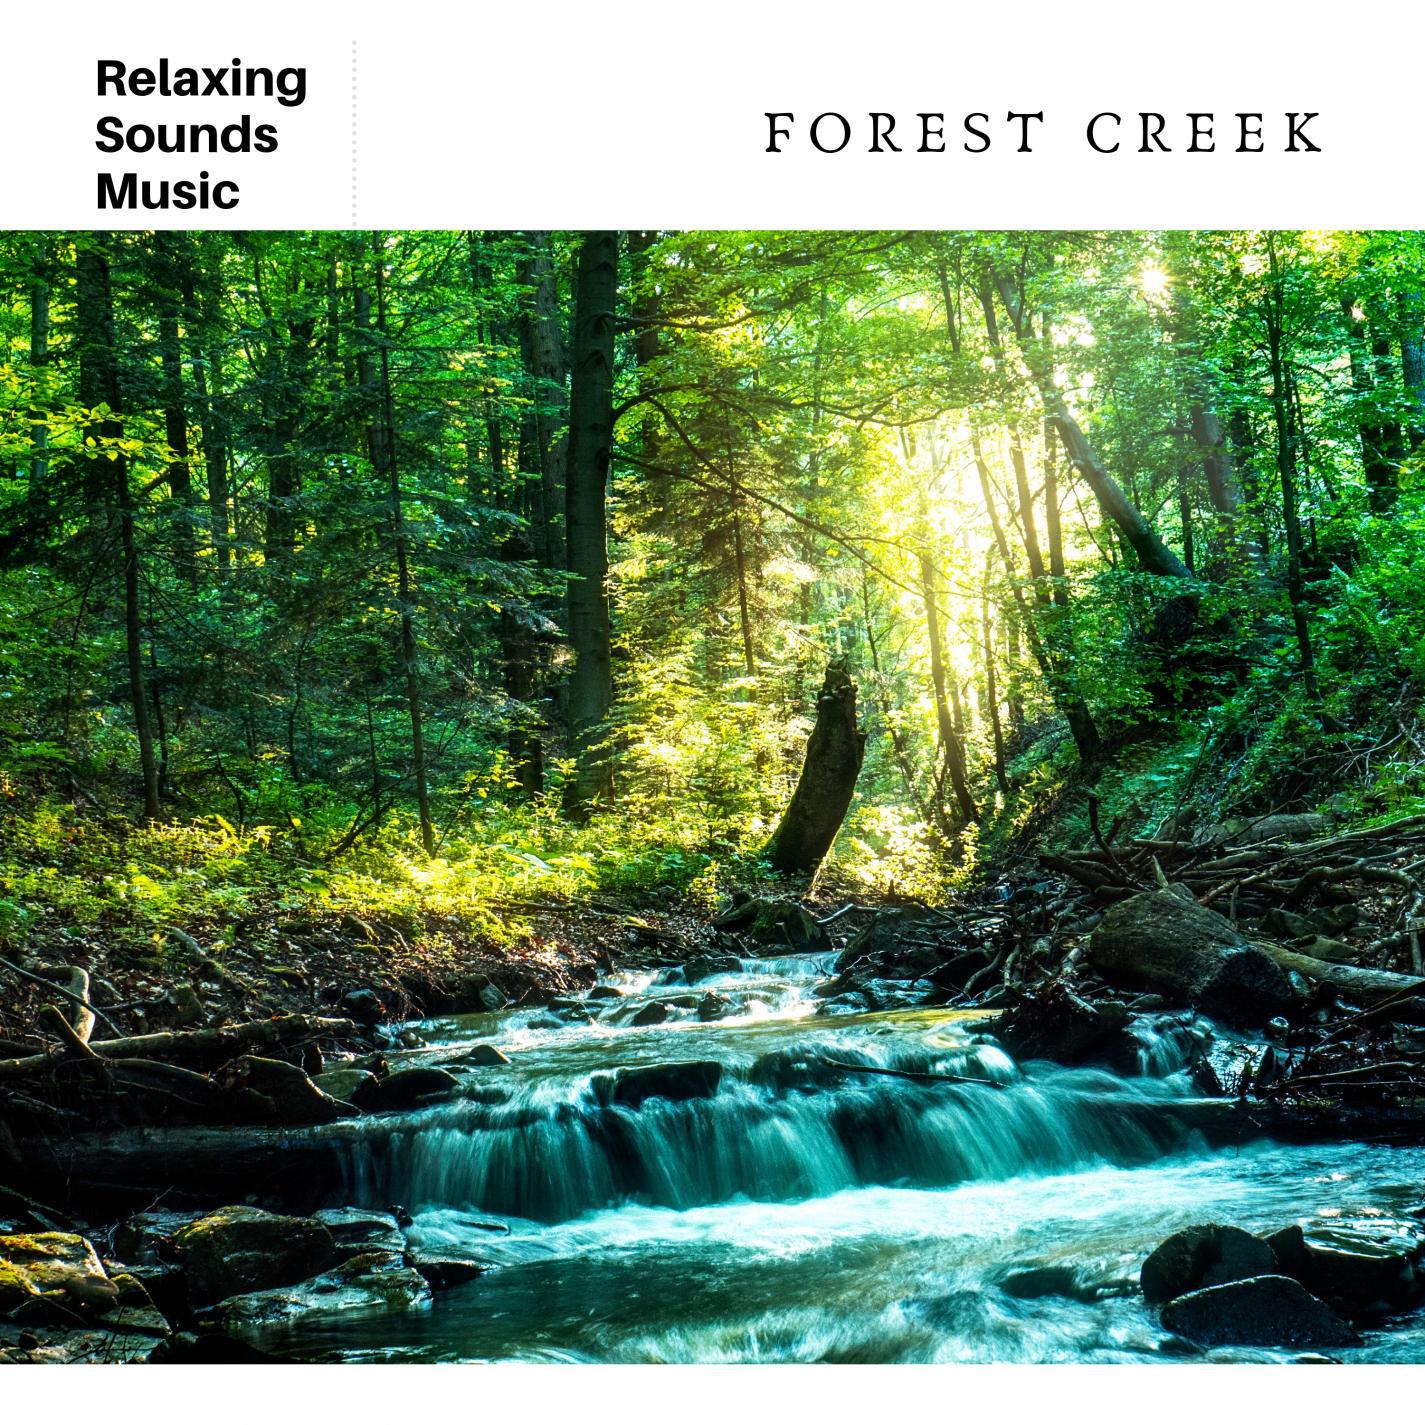 Relaxing Music with Nature Sounds: Forest Creek